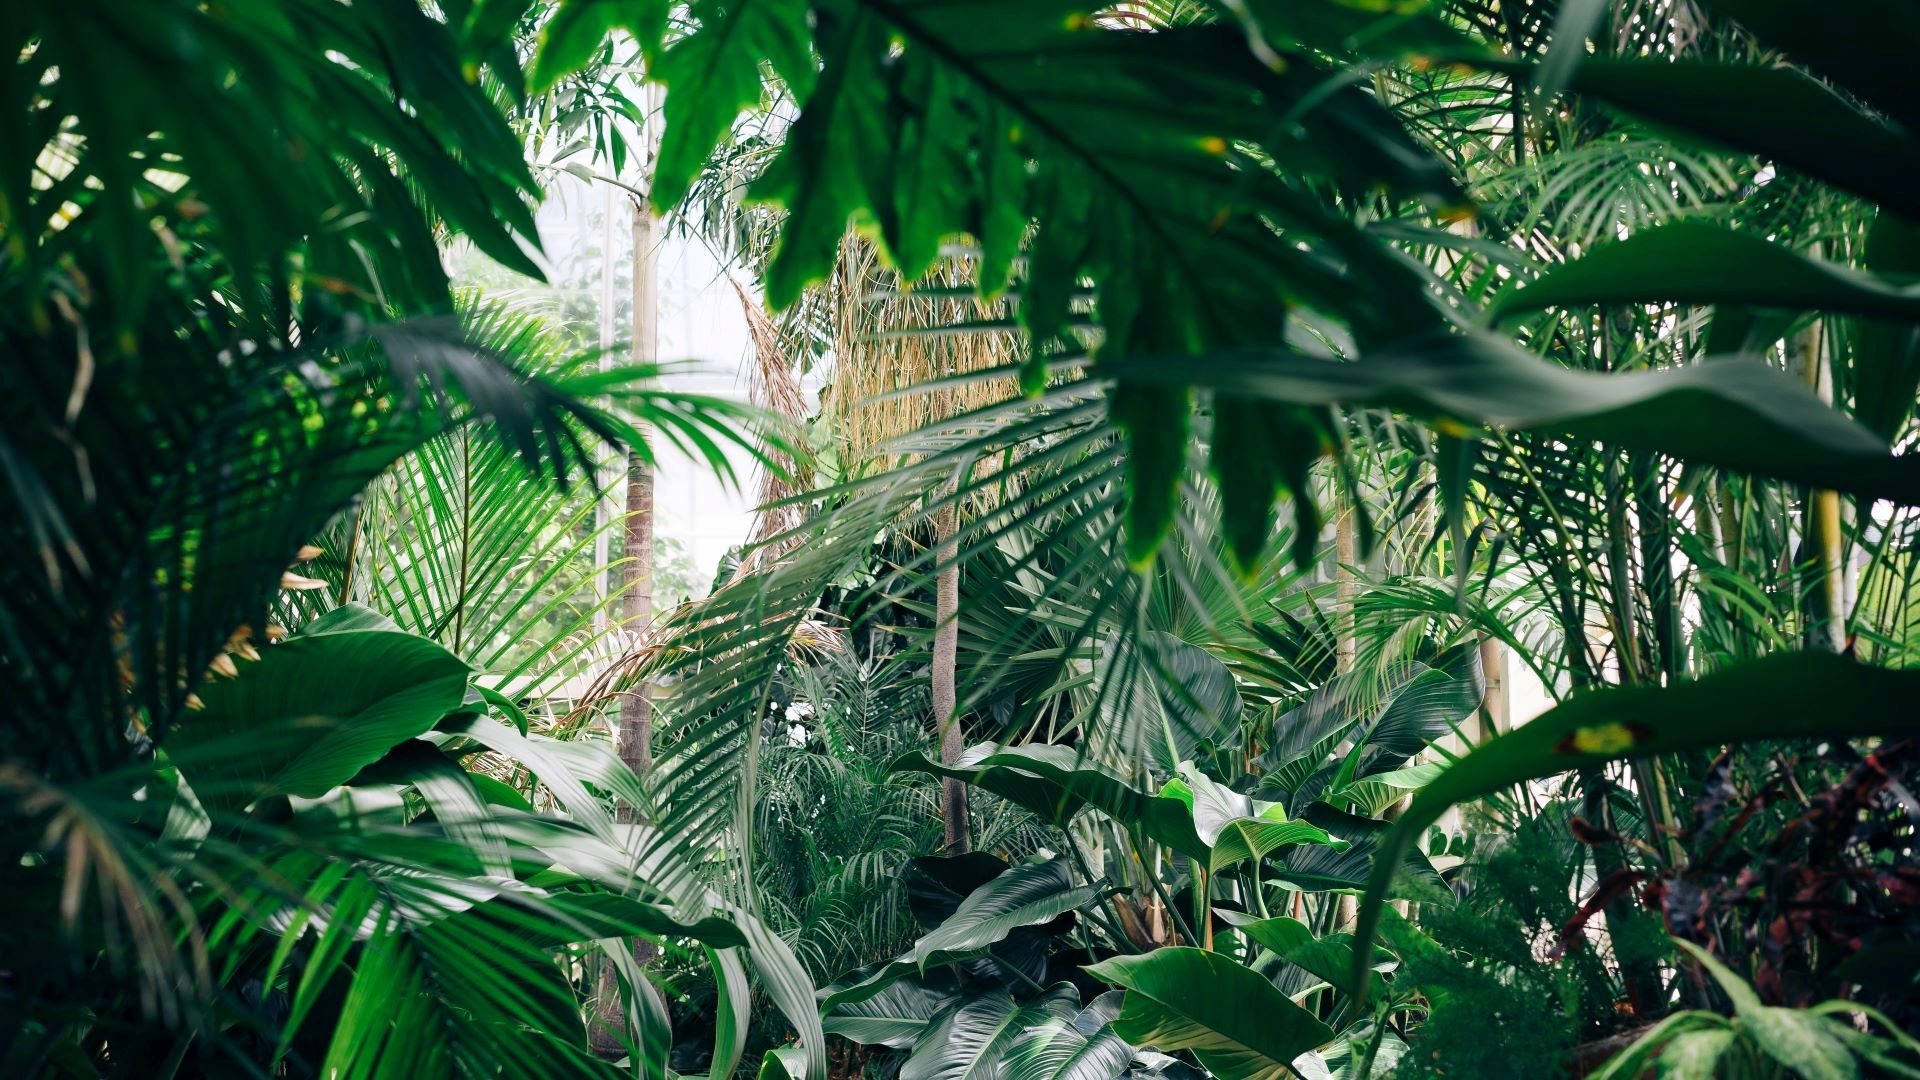 An image of palm trees and warm climate plants.